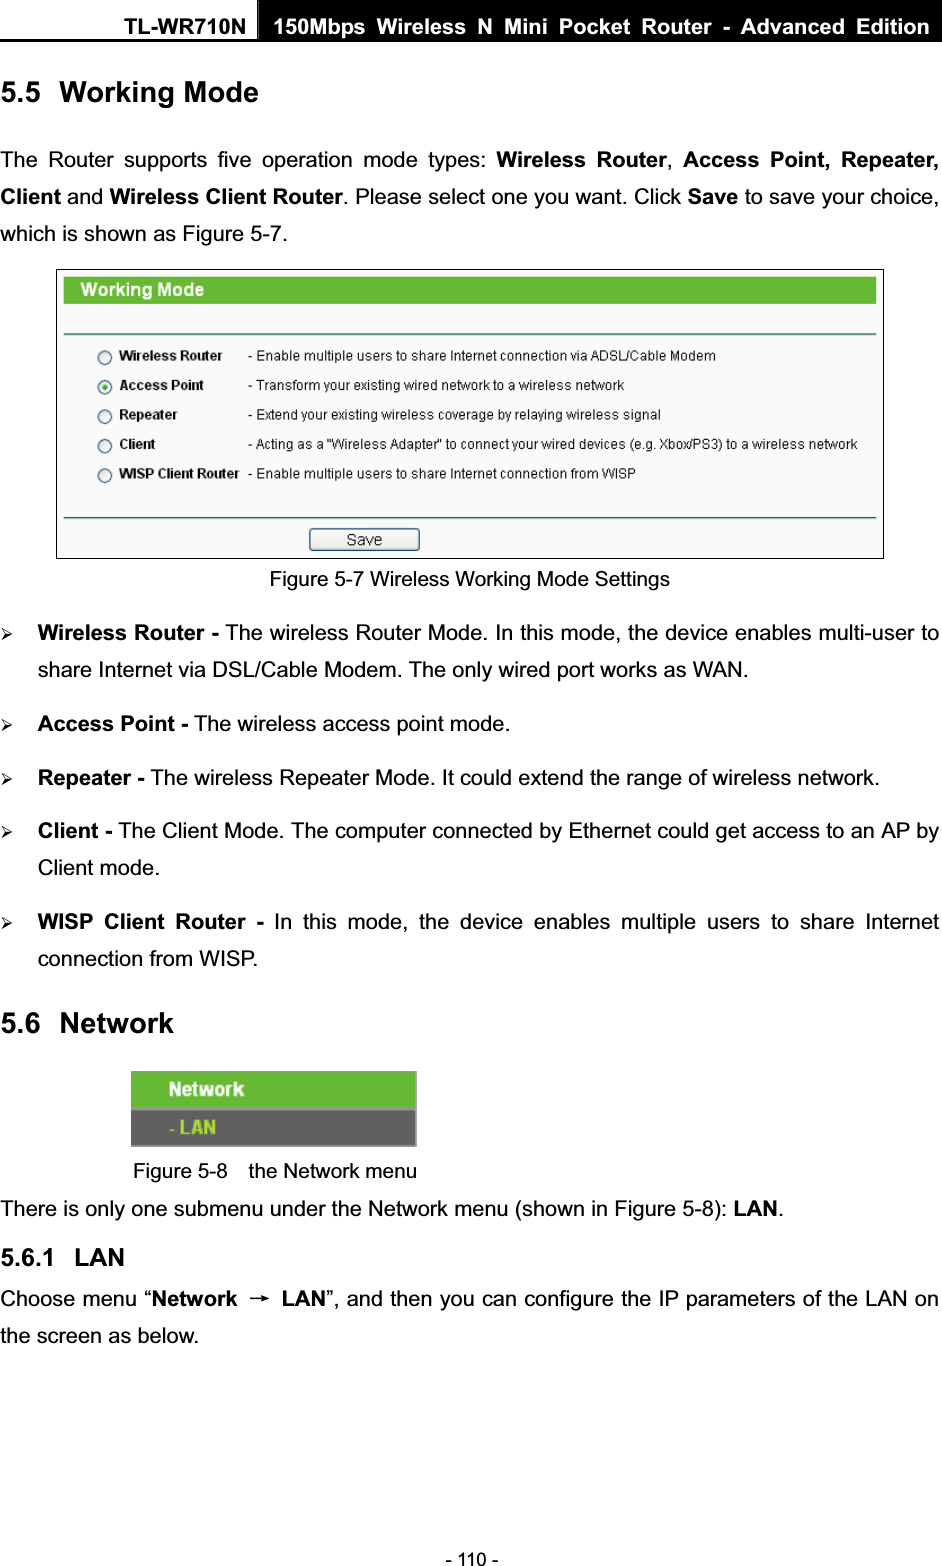 TL-WR710N  150Mbps Wireless N Mini Pocket Router - Advanced Edition- 110 - 5.5 Working Mode The Router supports five operation mode types: Wireless Router,Access Point, Repeater, Client and Wireless Client Router. Please select one you want. Click Save to save your choice, which is shown as Figure 5-7.   Figure 5-7 Wireless Working Mode Settings ¾Wireless Router - The wireless Router Mode. In this mode, the device enables multi-user to share Internet via DSL/Cable Modem. The only wired port works as WAN. ¾Access Point - The wireless access point mode.   ¾Repeater - The wireless Repeater Mode. It could extend the range of wireless network. ¾Client - The Client Mode. The computer connected by Ethernet could get access to an AP by Client mode. ¾WISP Client Router - In this mode, the device enables multiple users to share Internet connection from WISP. 5.6 NetworkFigure 5-8  the Network menu There is only one submenu under the Network menu (shown in Figure 5-8): LAN.5.6.1 LANChoose menu “Network ė LAN”, and then you can configure the IP parameters of the LAN on the screen as below. 